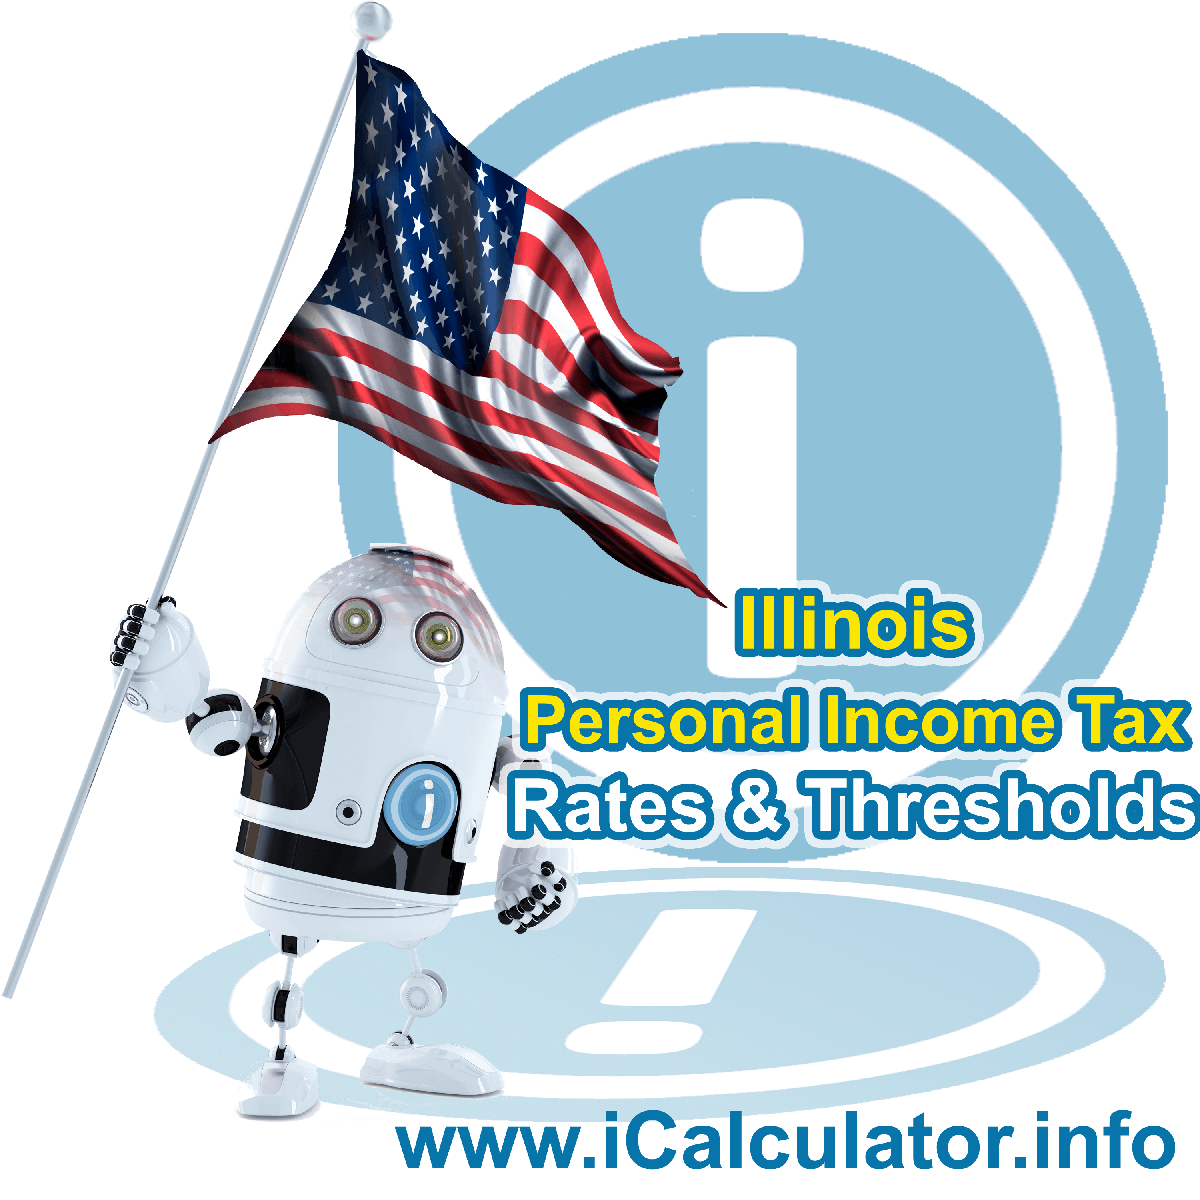 Illinois State Tax Tables 2013. This image displays details of the Illinois State Tax Tables for the 2013 tax return year which is provided in support of the 2013 US Tax Calculator